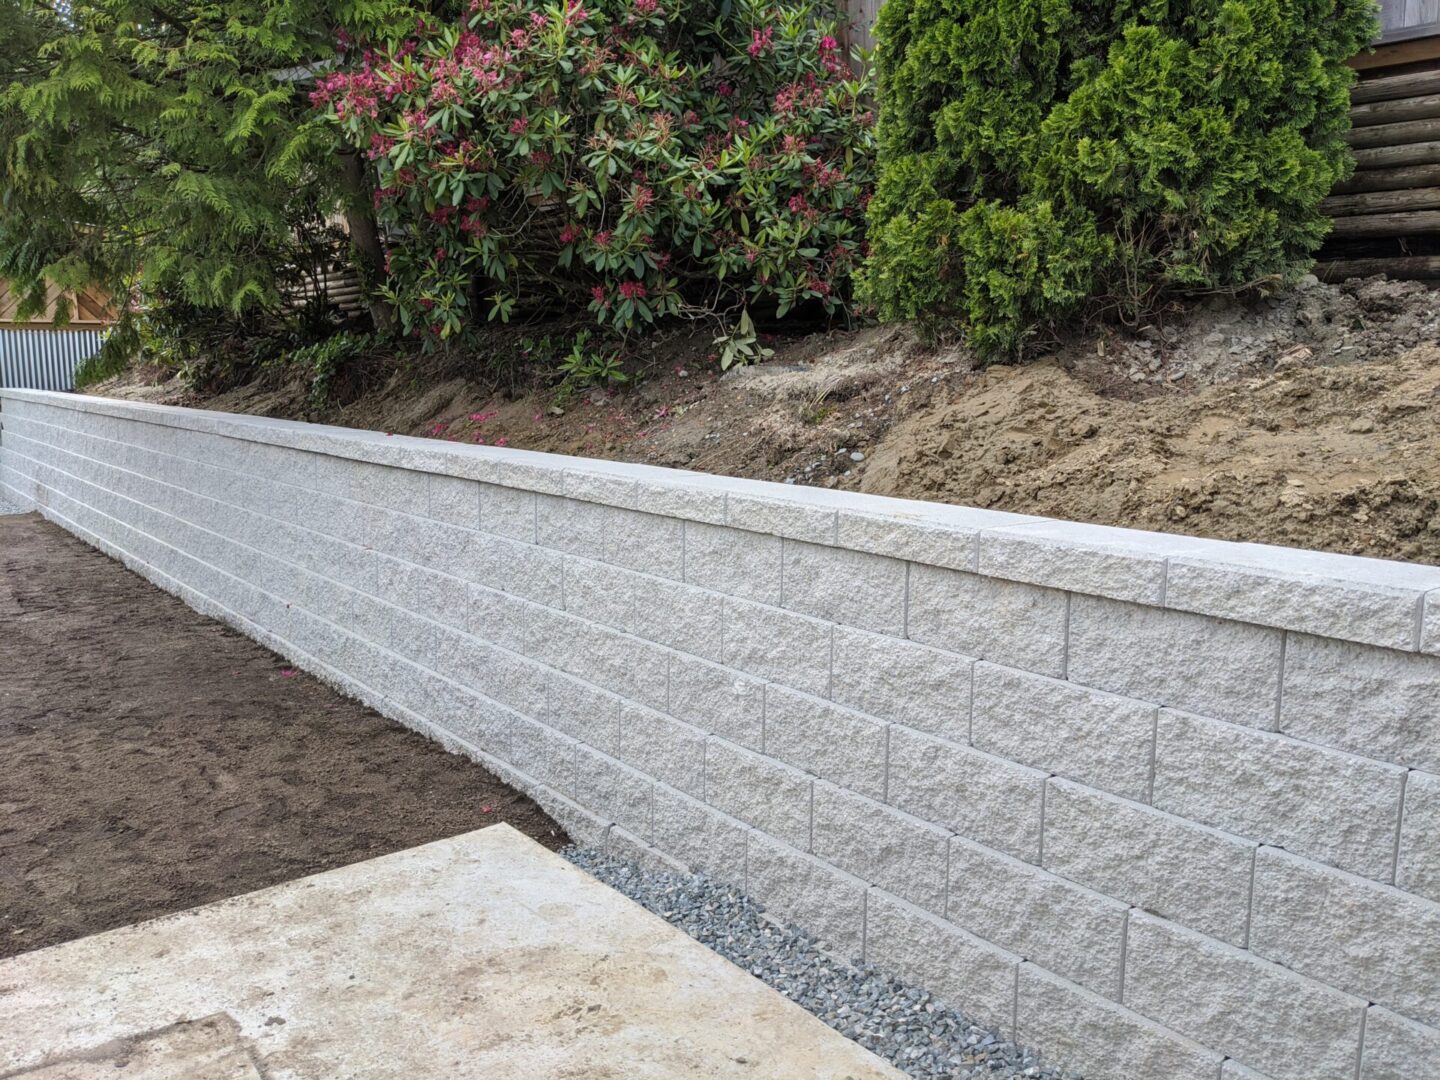 A newly constructed gray brick retaining wall separating a dirt area from a garden with shrubs and flowering plants.